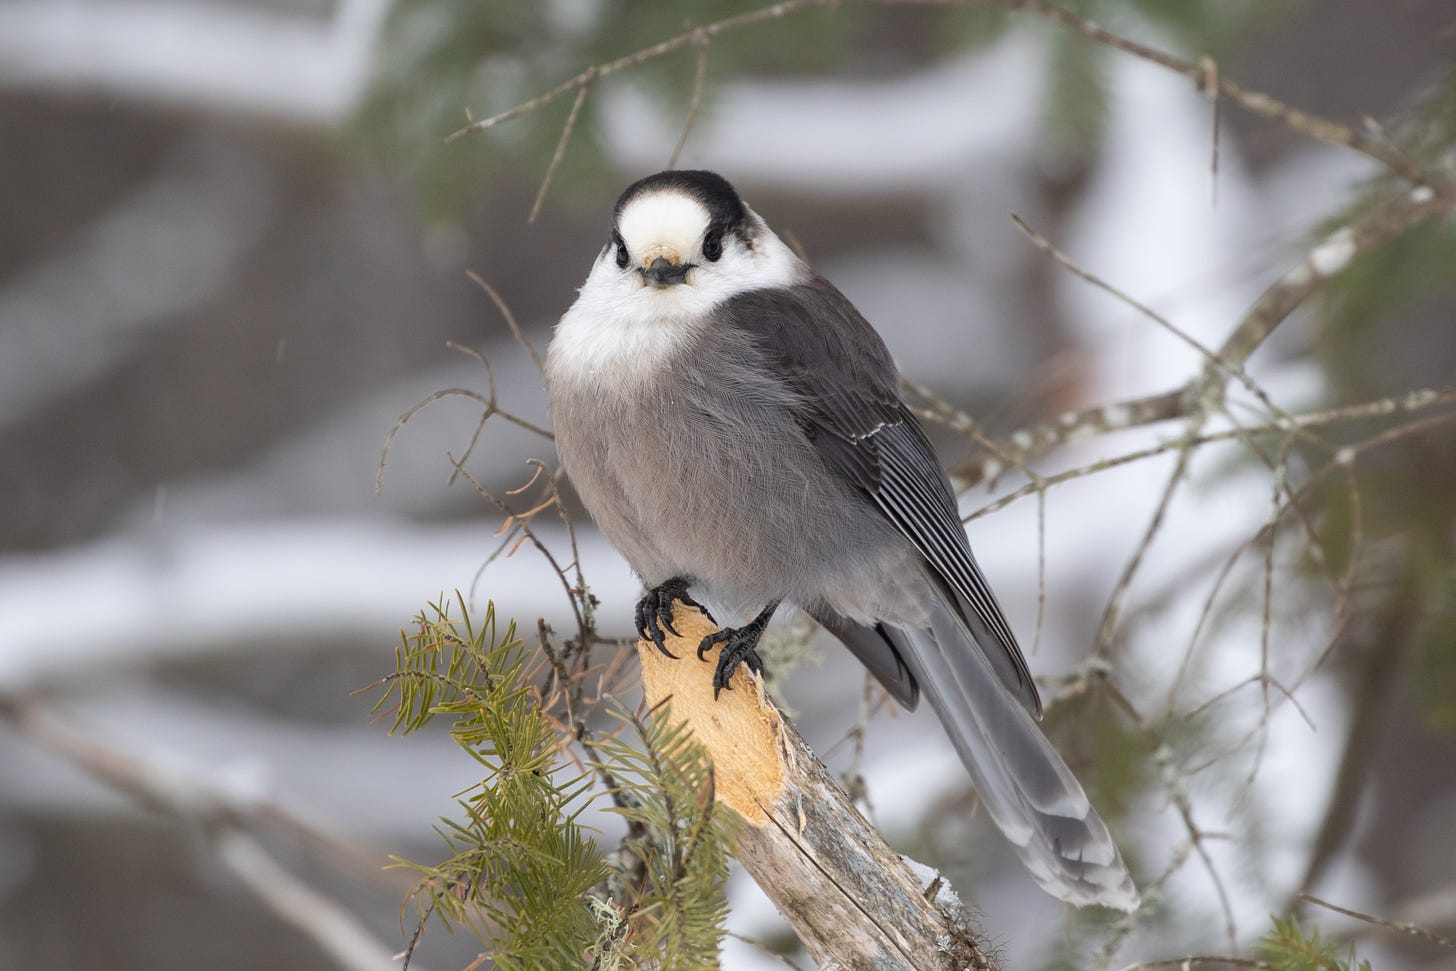 a fluffy gray bird with a long tail, white head, and black cap with black eyes and a small black beak sitting on a snag of a tree, looking at the viewer in front of a snowy landscape